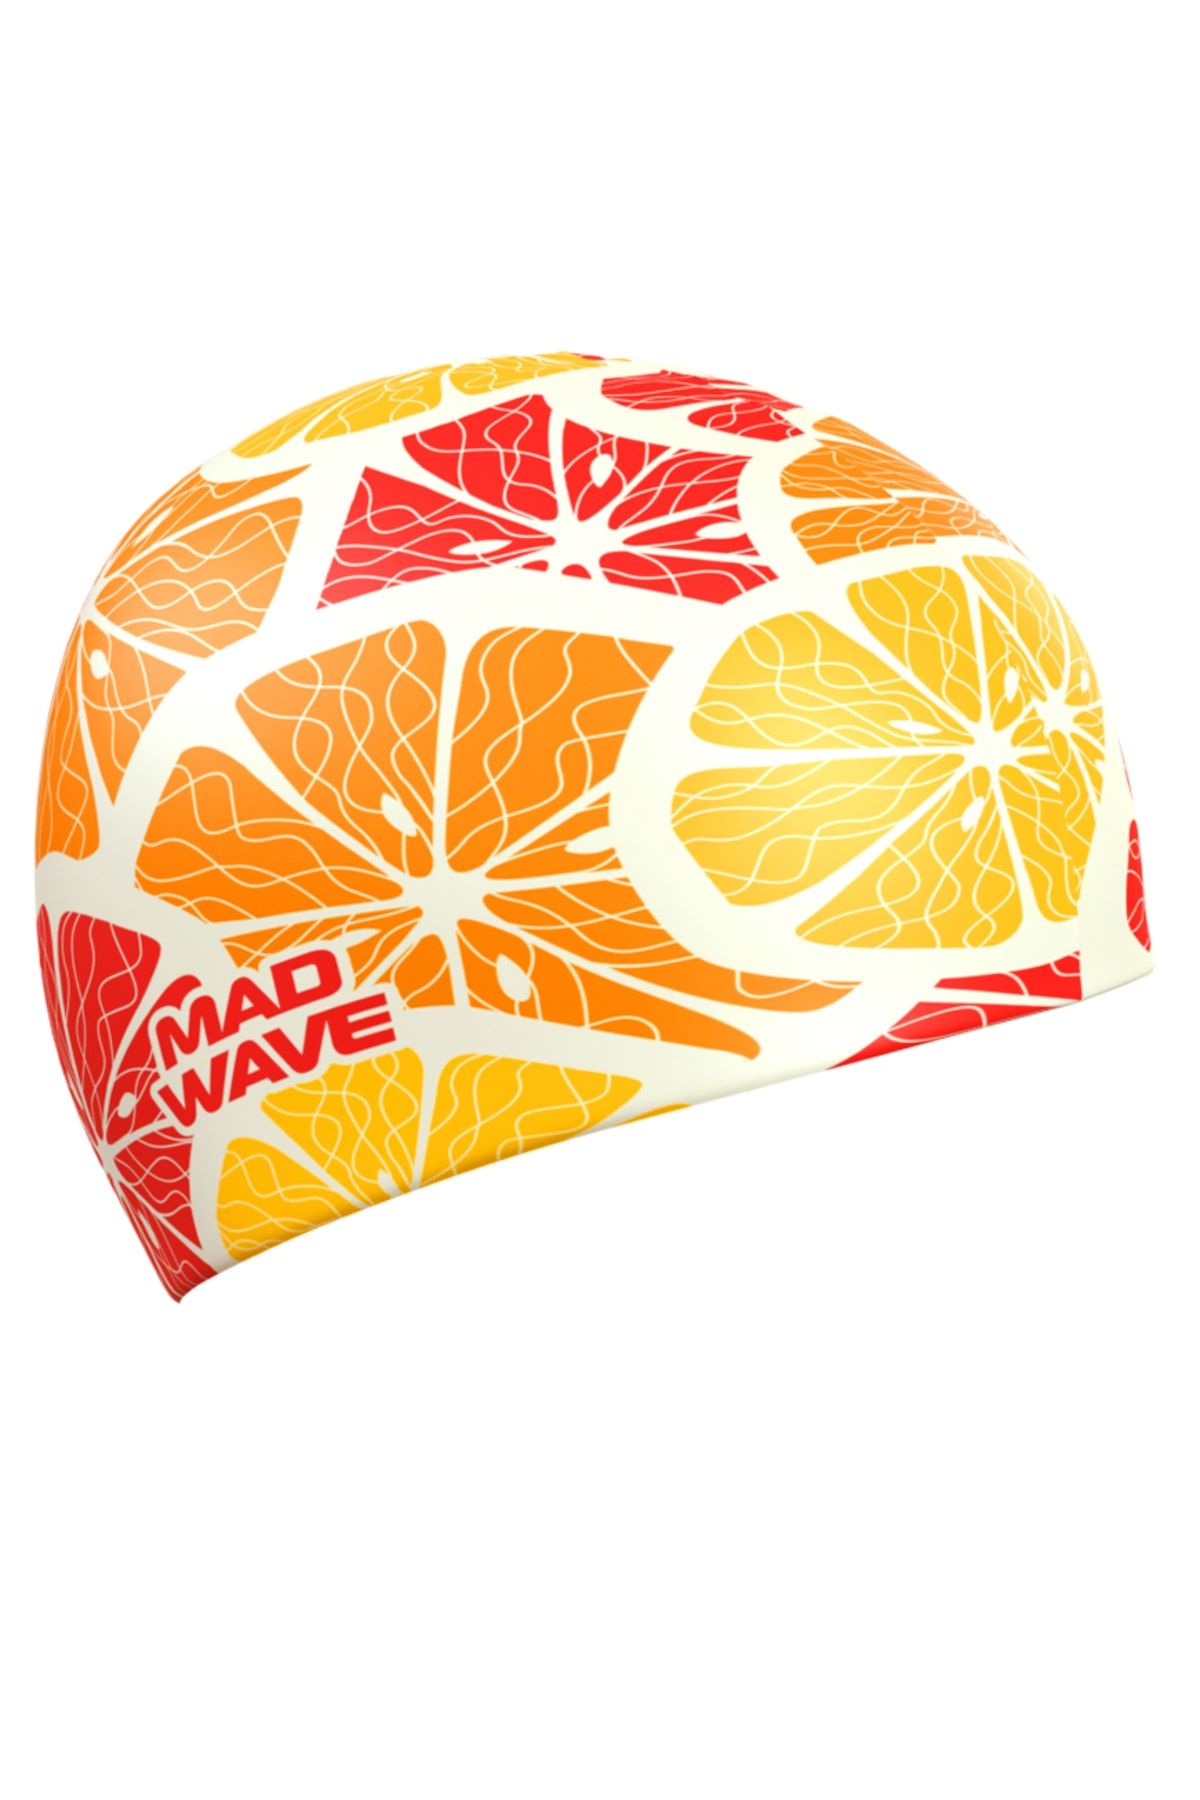 Mad Wave M0553 16 0 06W Silicone cap CITRUS, One size, Yell